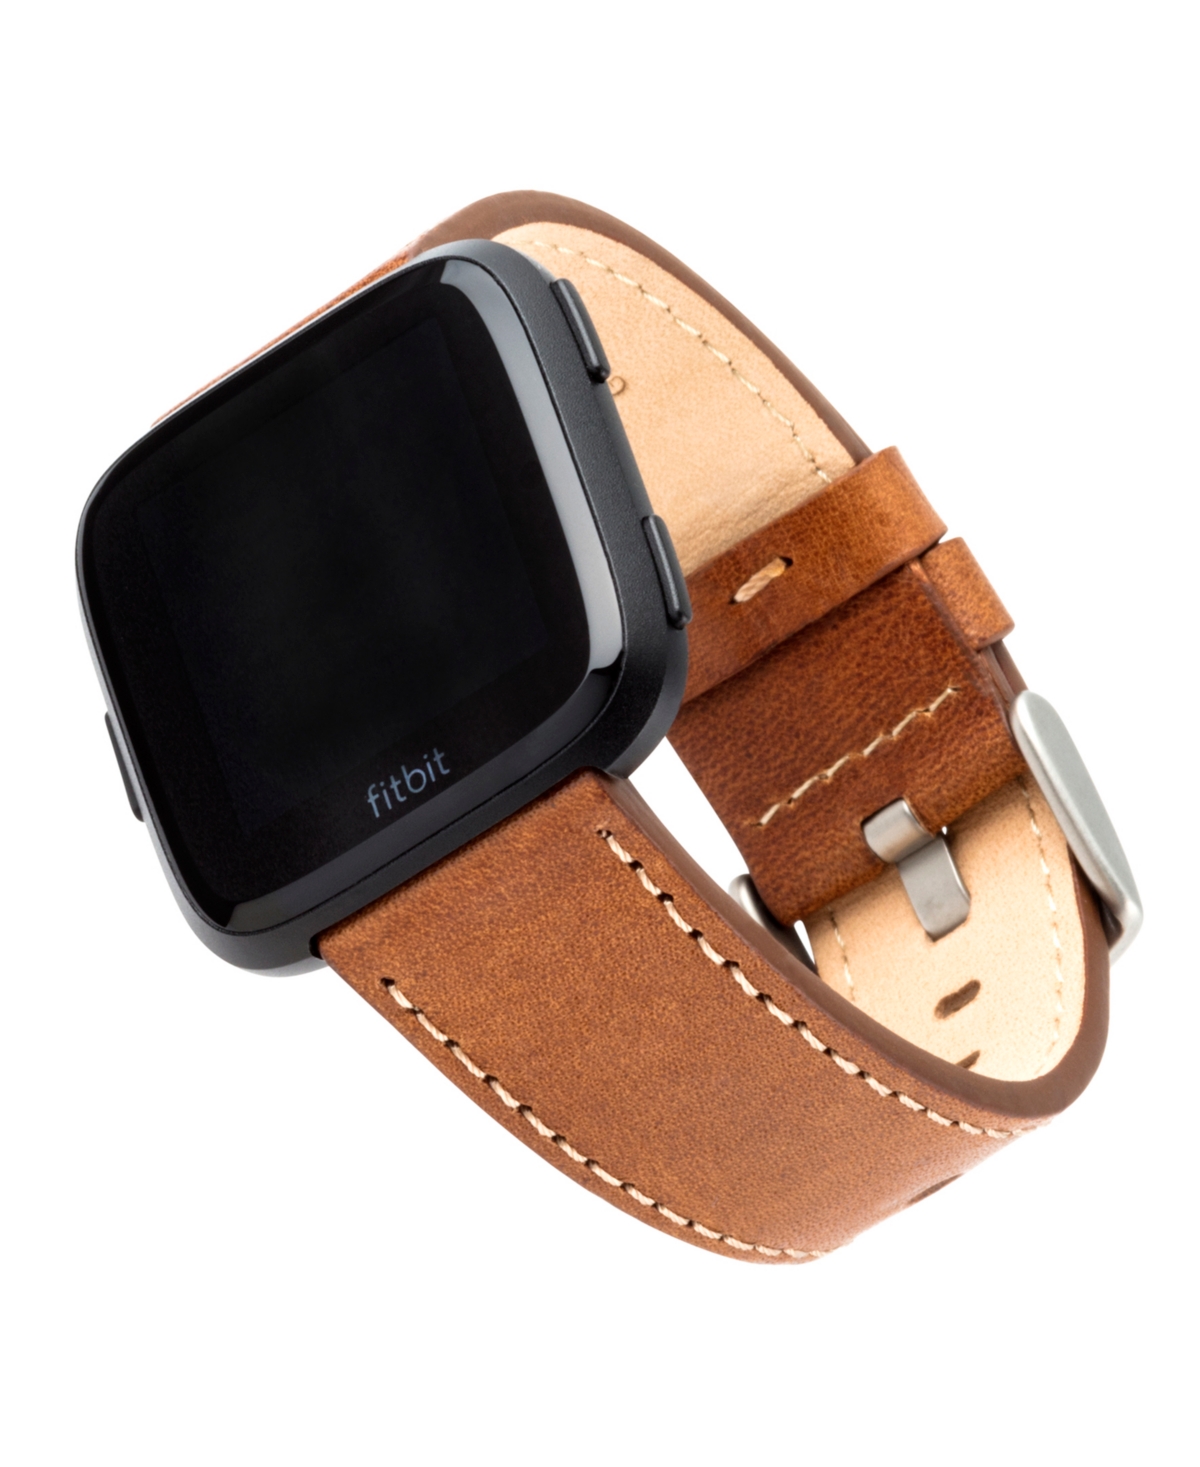 Brown Premium Leather Band with White Stitching Compatible with the Fitbit Versa and Fitbit Versa 2 - Brown